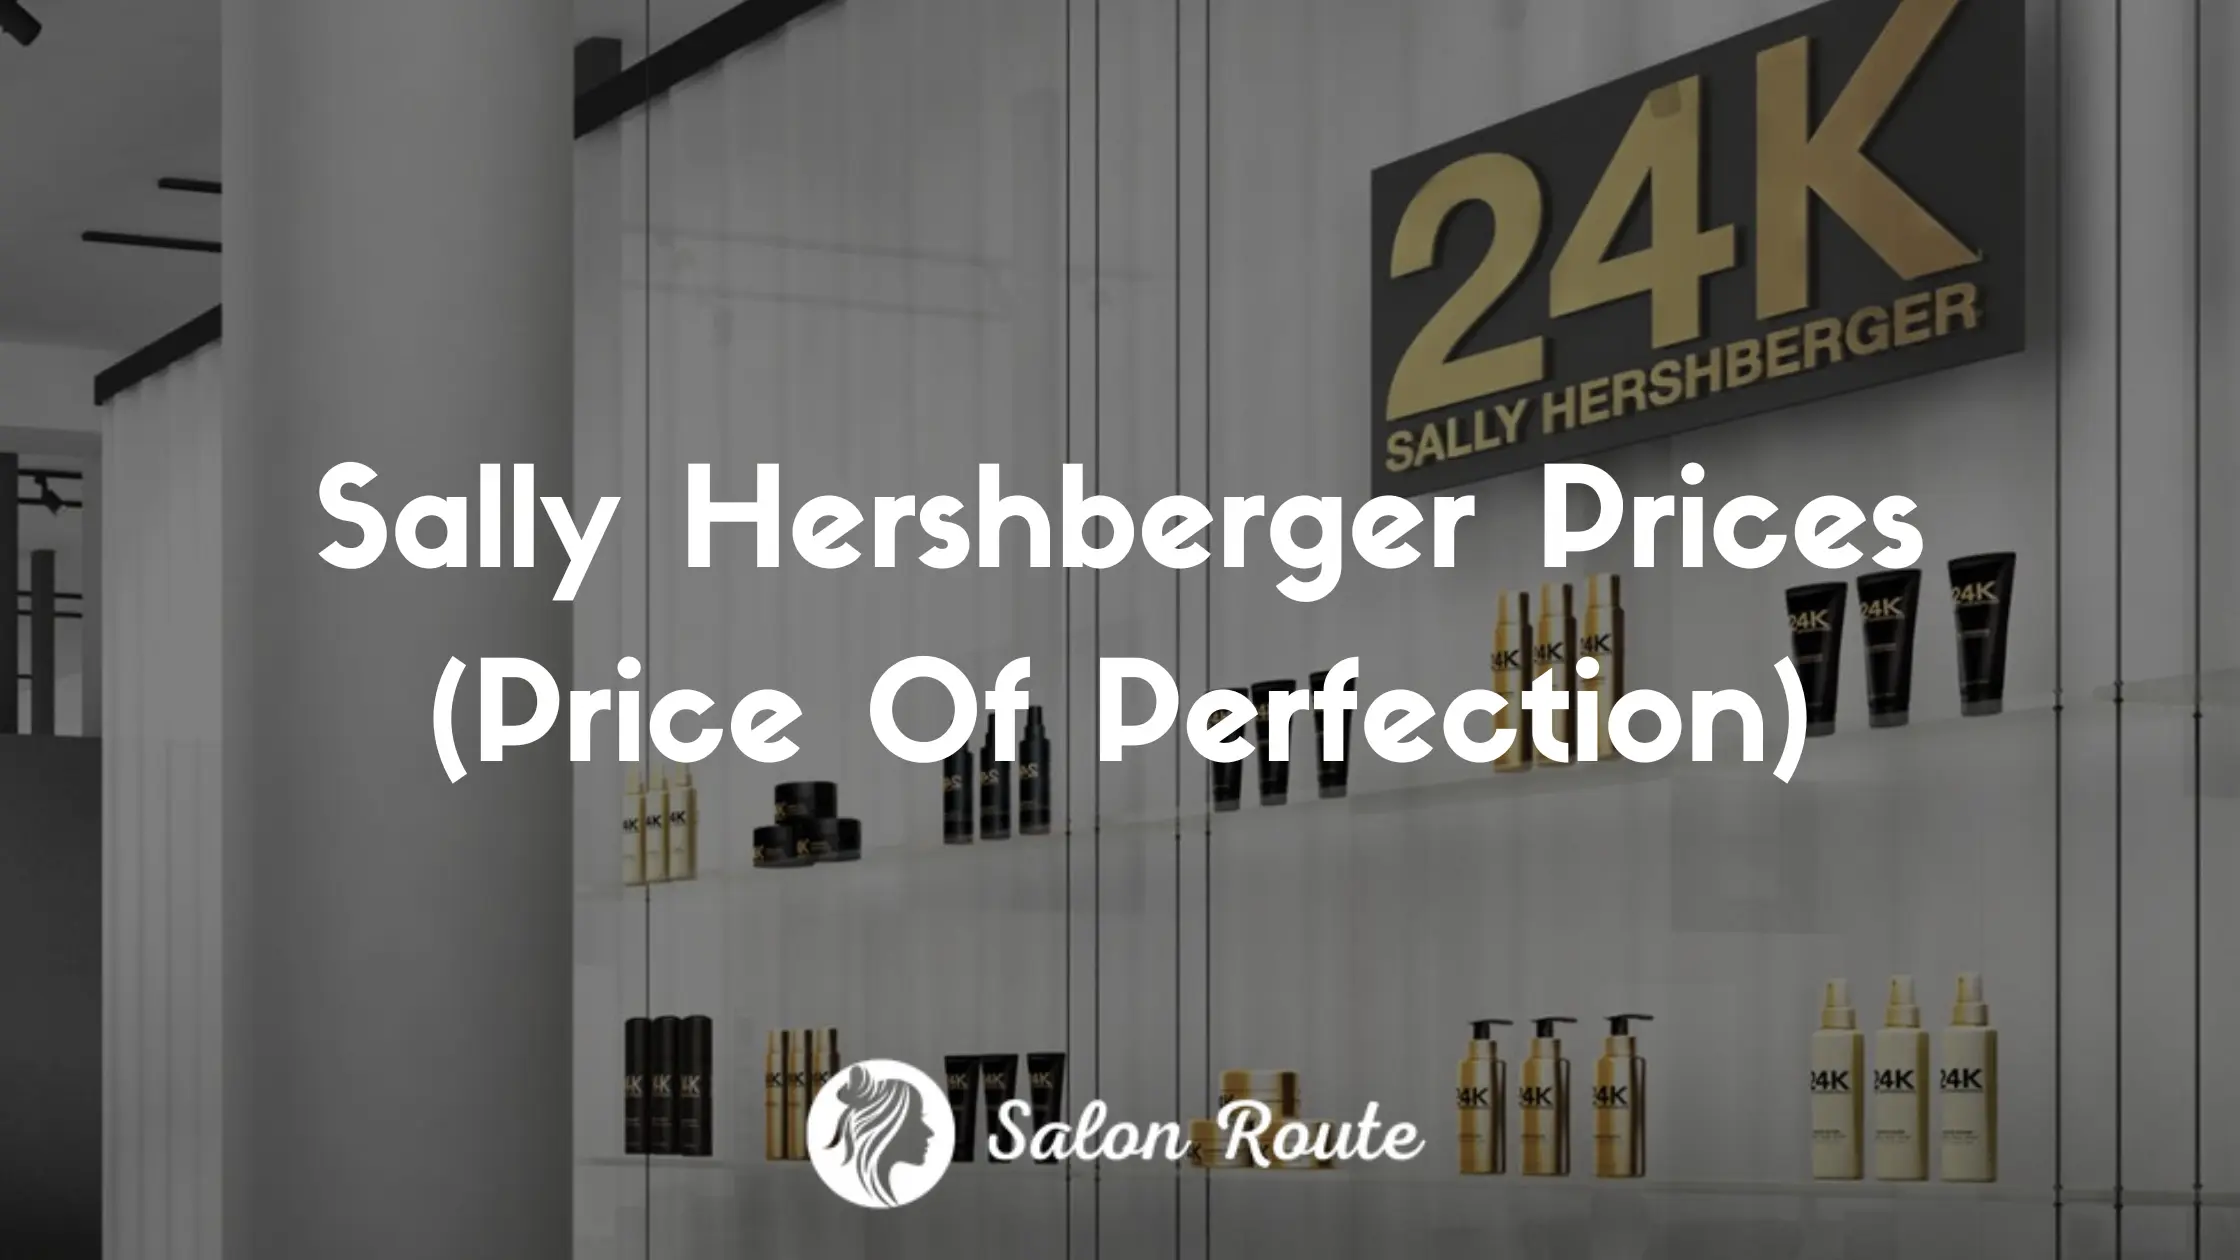 Sally Hershberger Prices (Price Of Perfection)